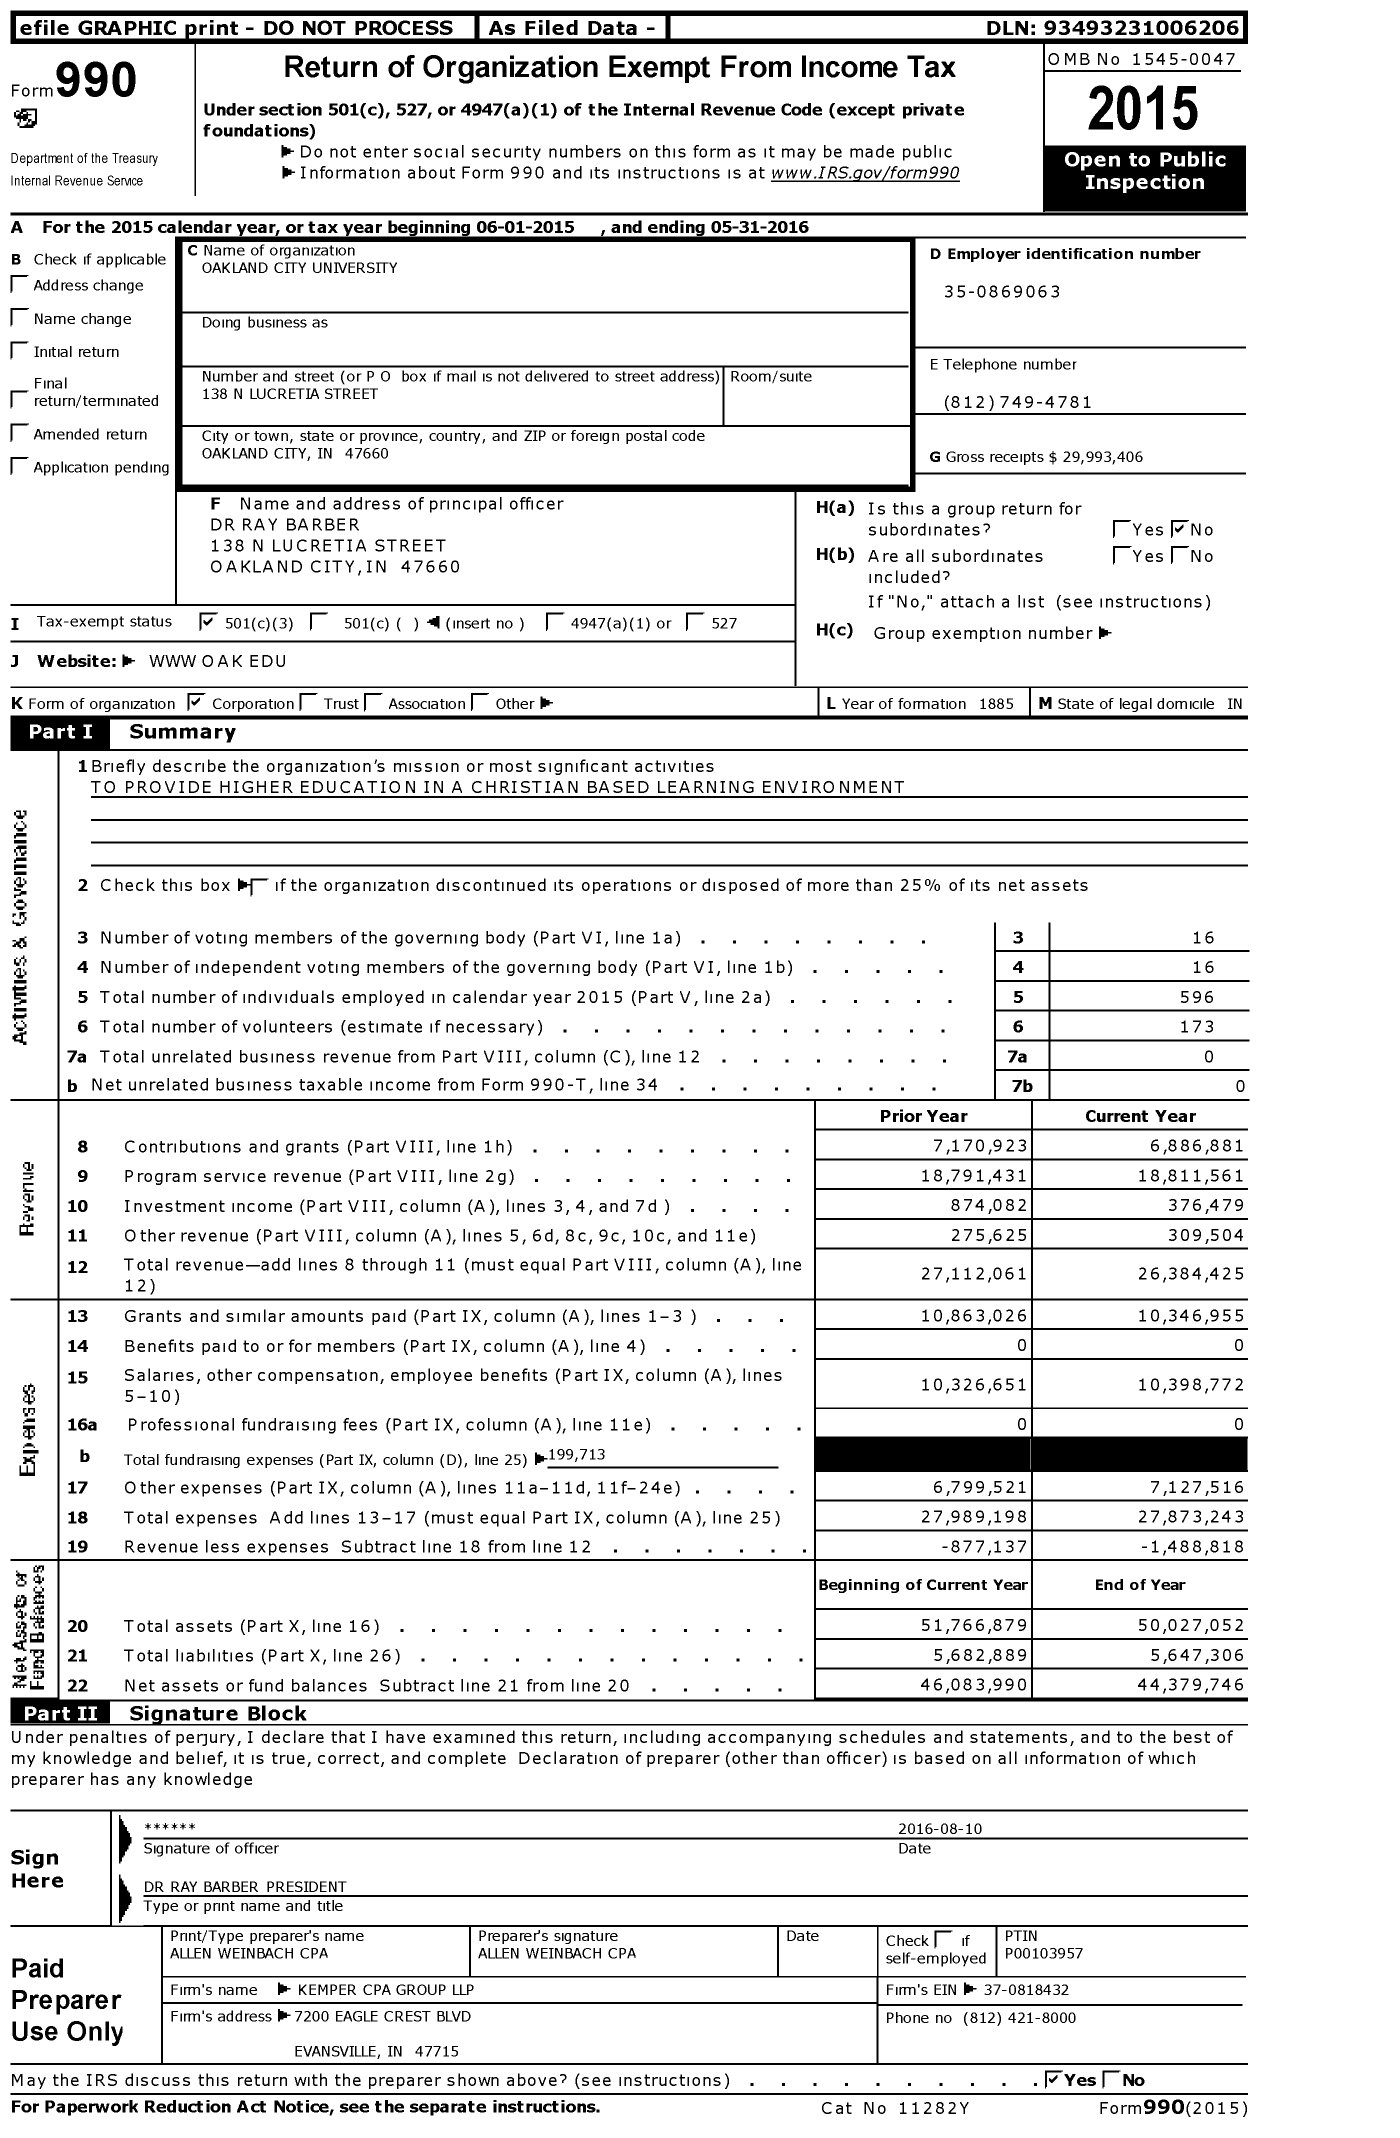 Image of first page of 2015 Form 990 for Oakland City University (OCU)